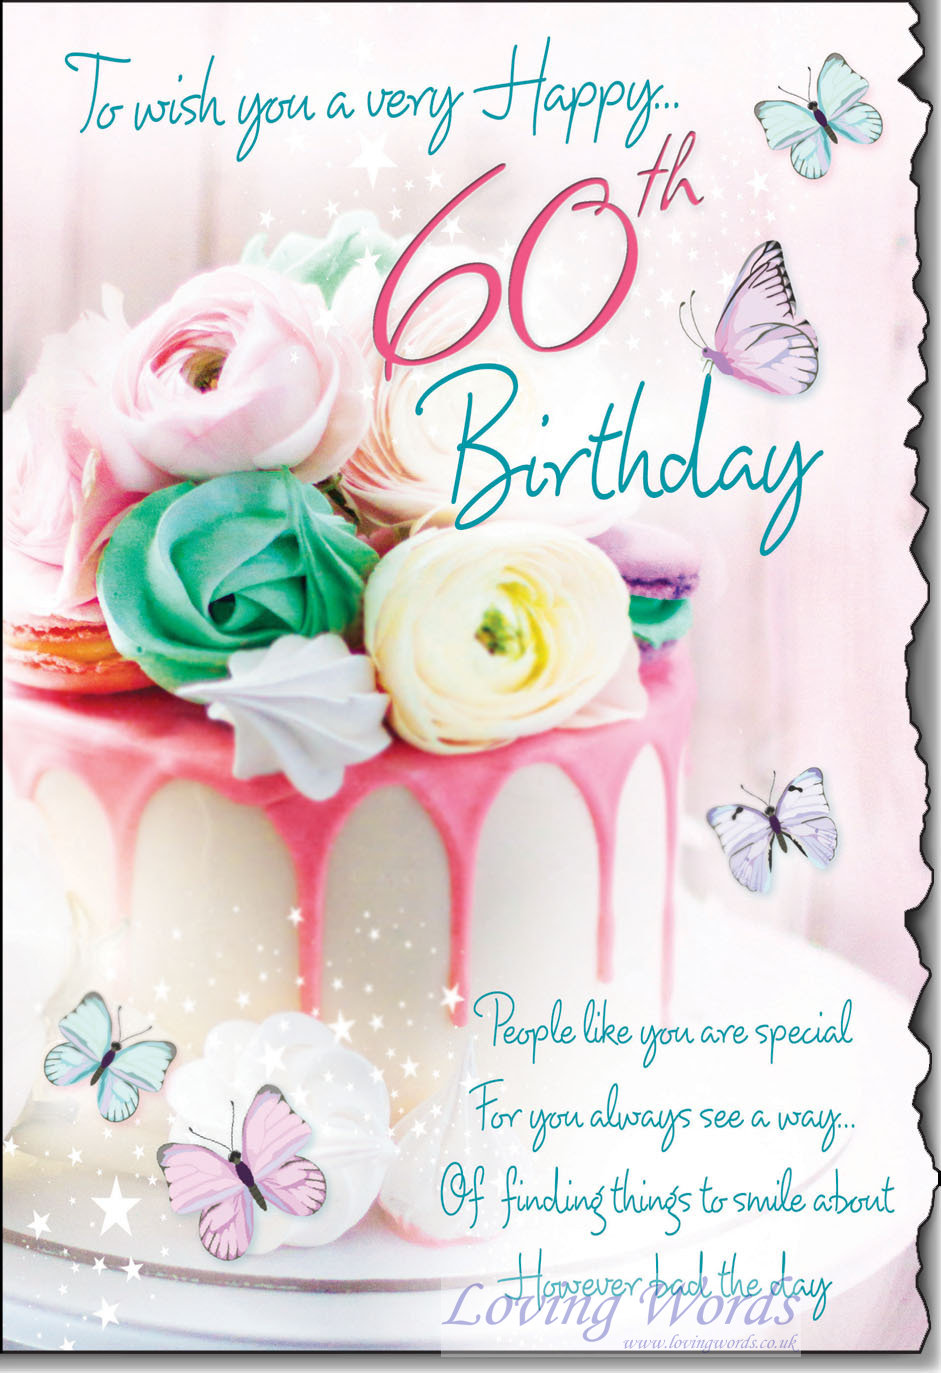 quotes-happy-60th-birthday-wishes-it-seems-to-you-that-it-was